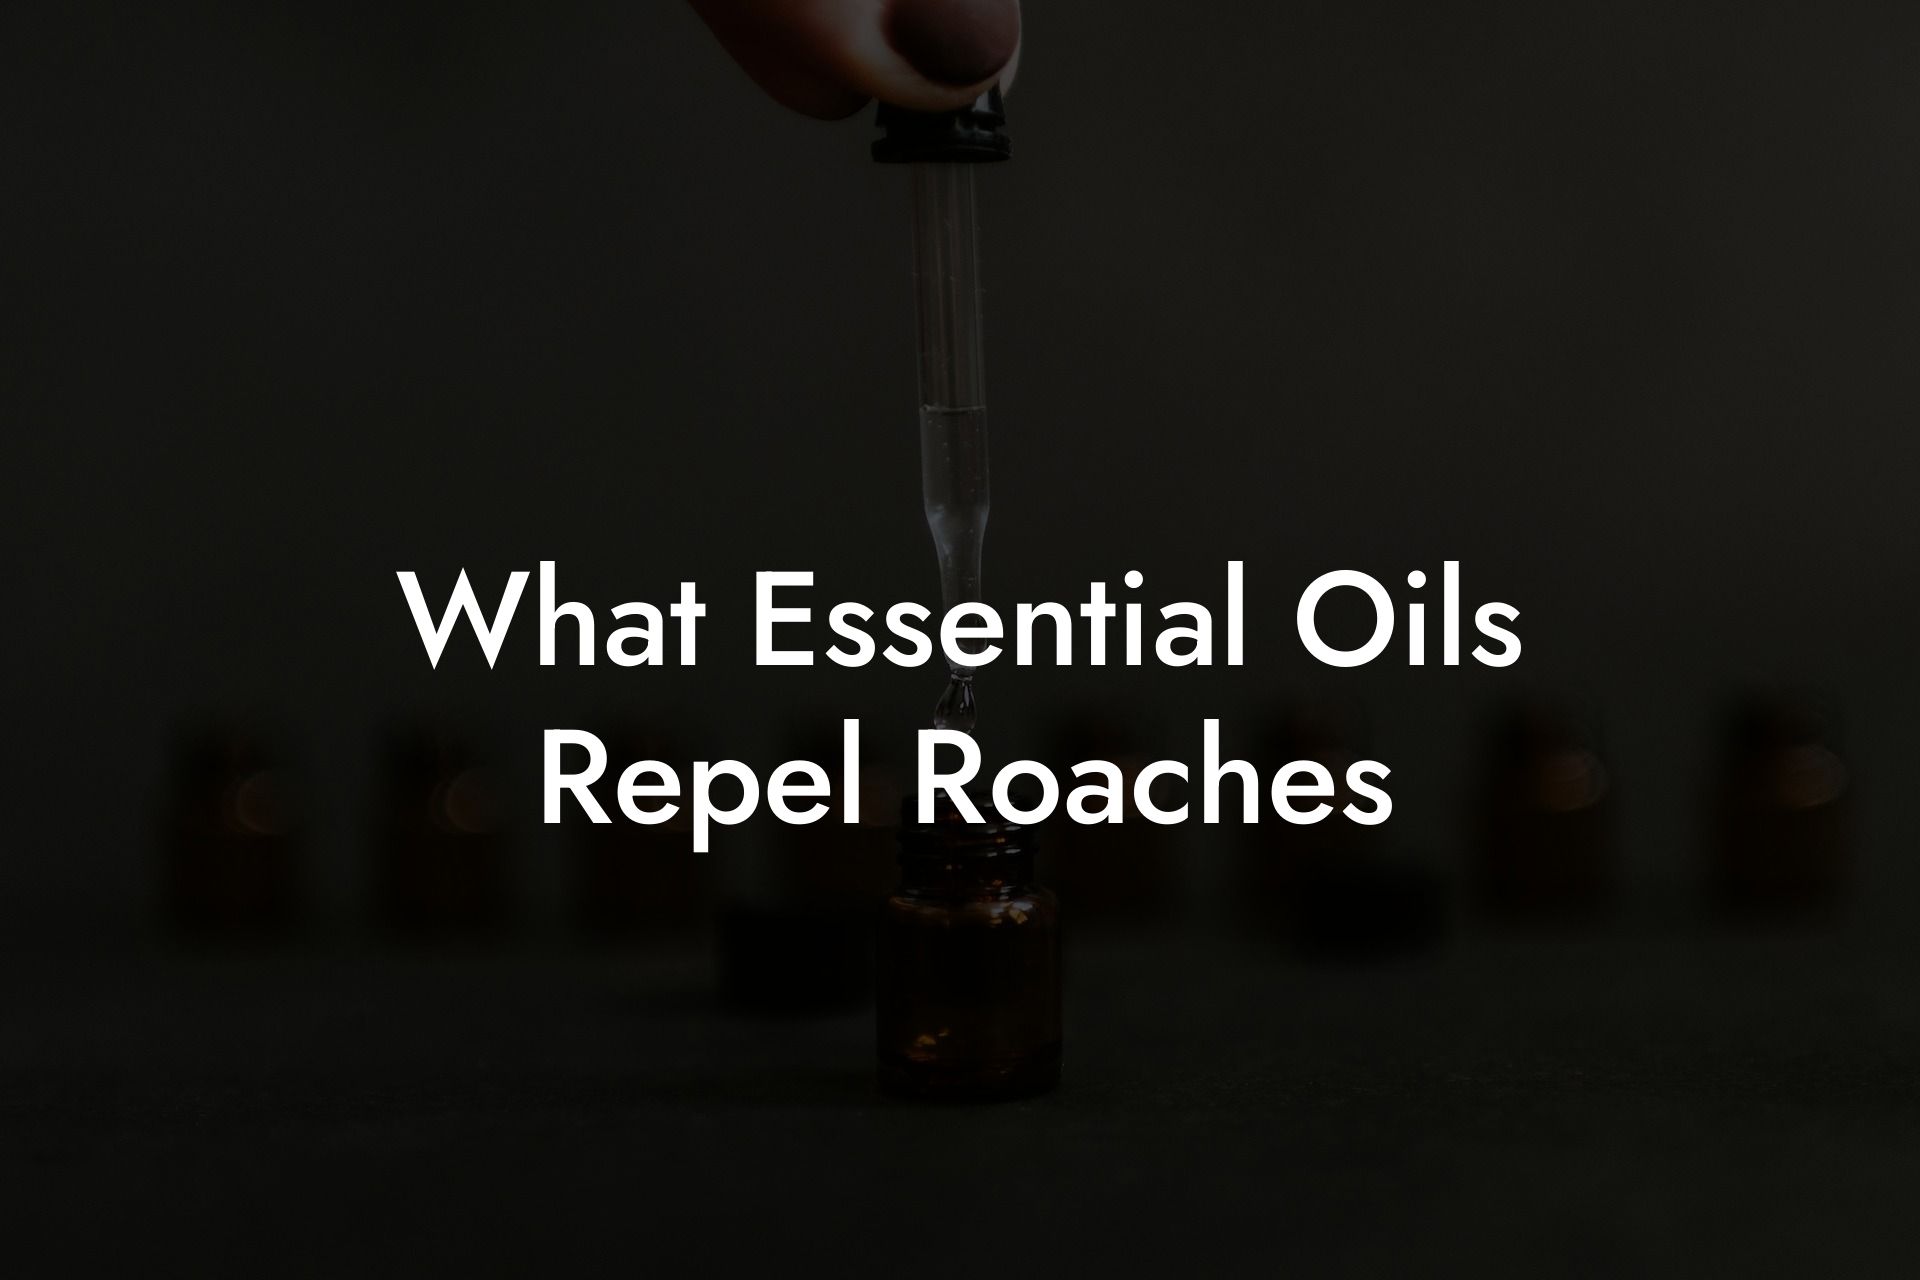 What Essential Oils Repel Roaches